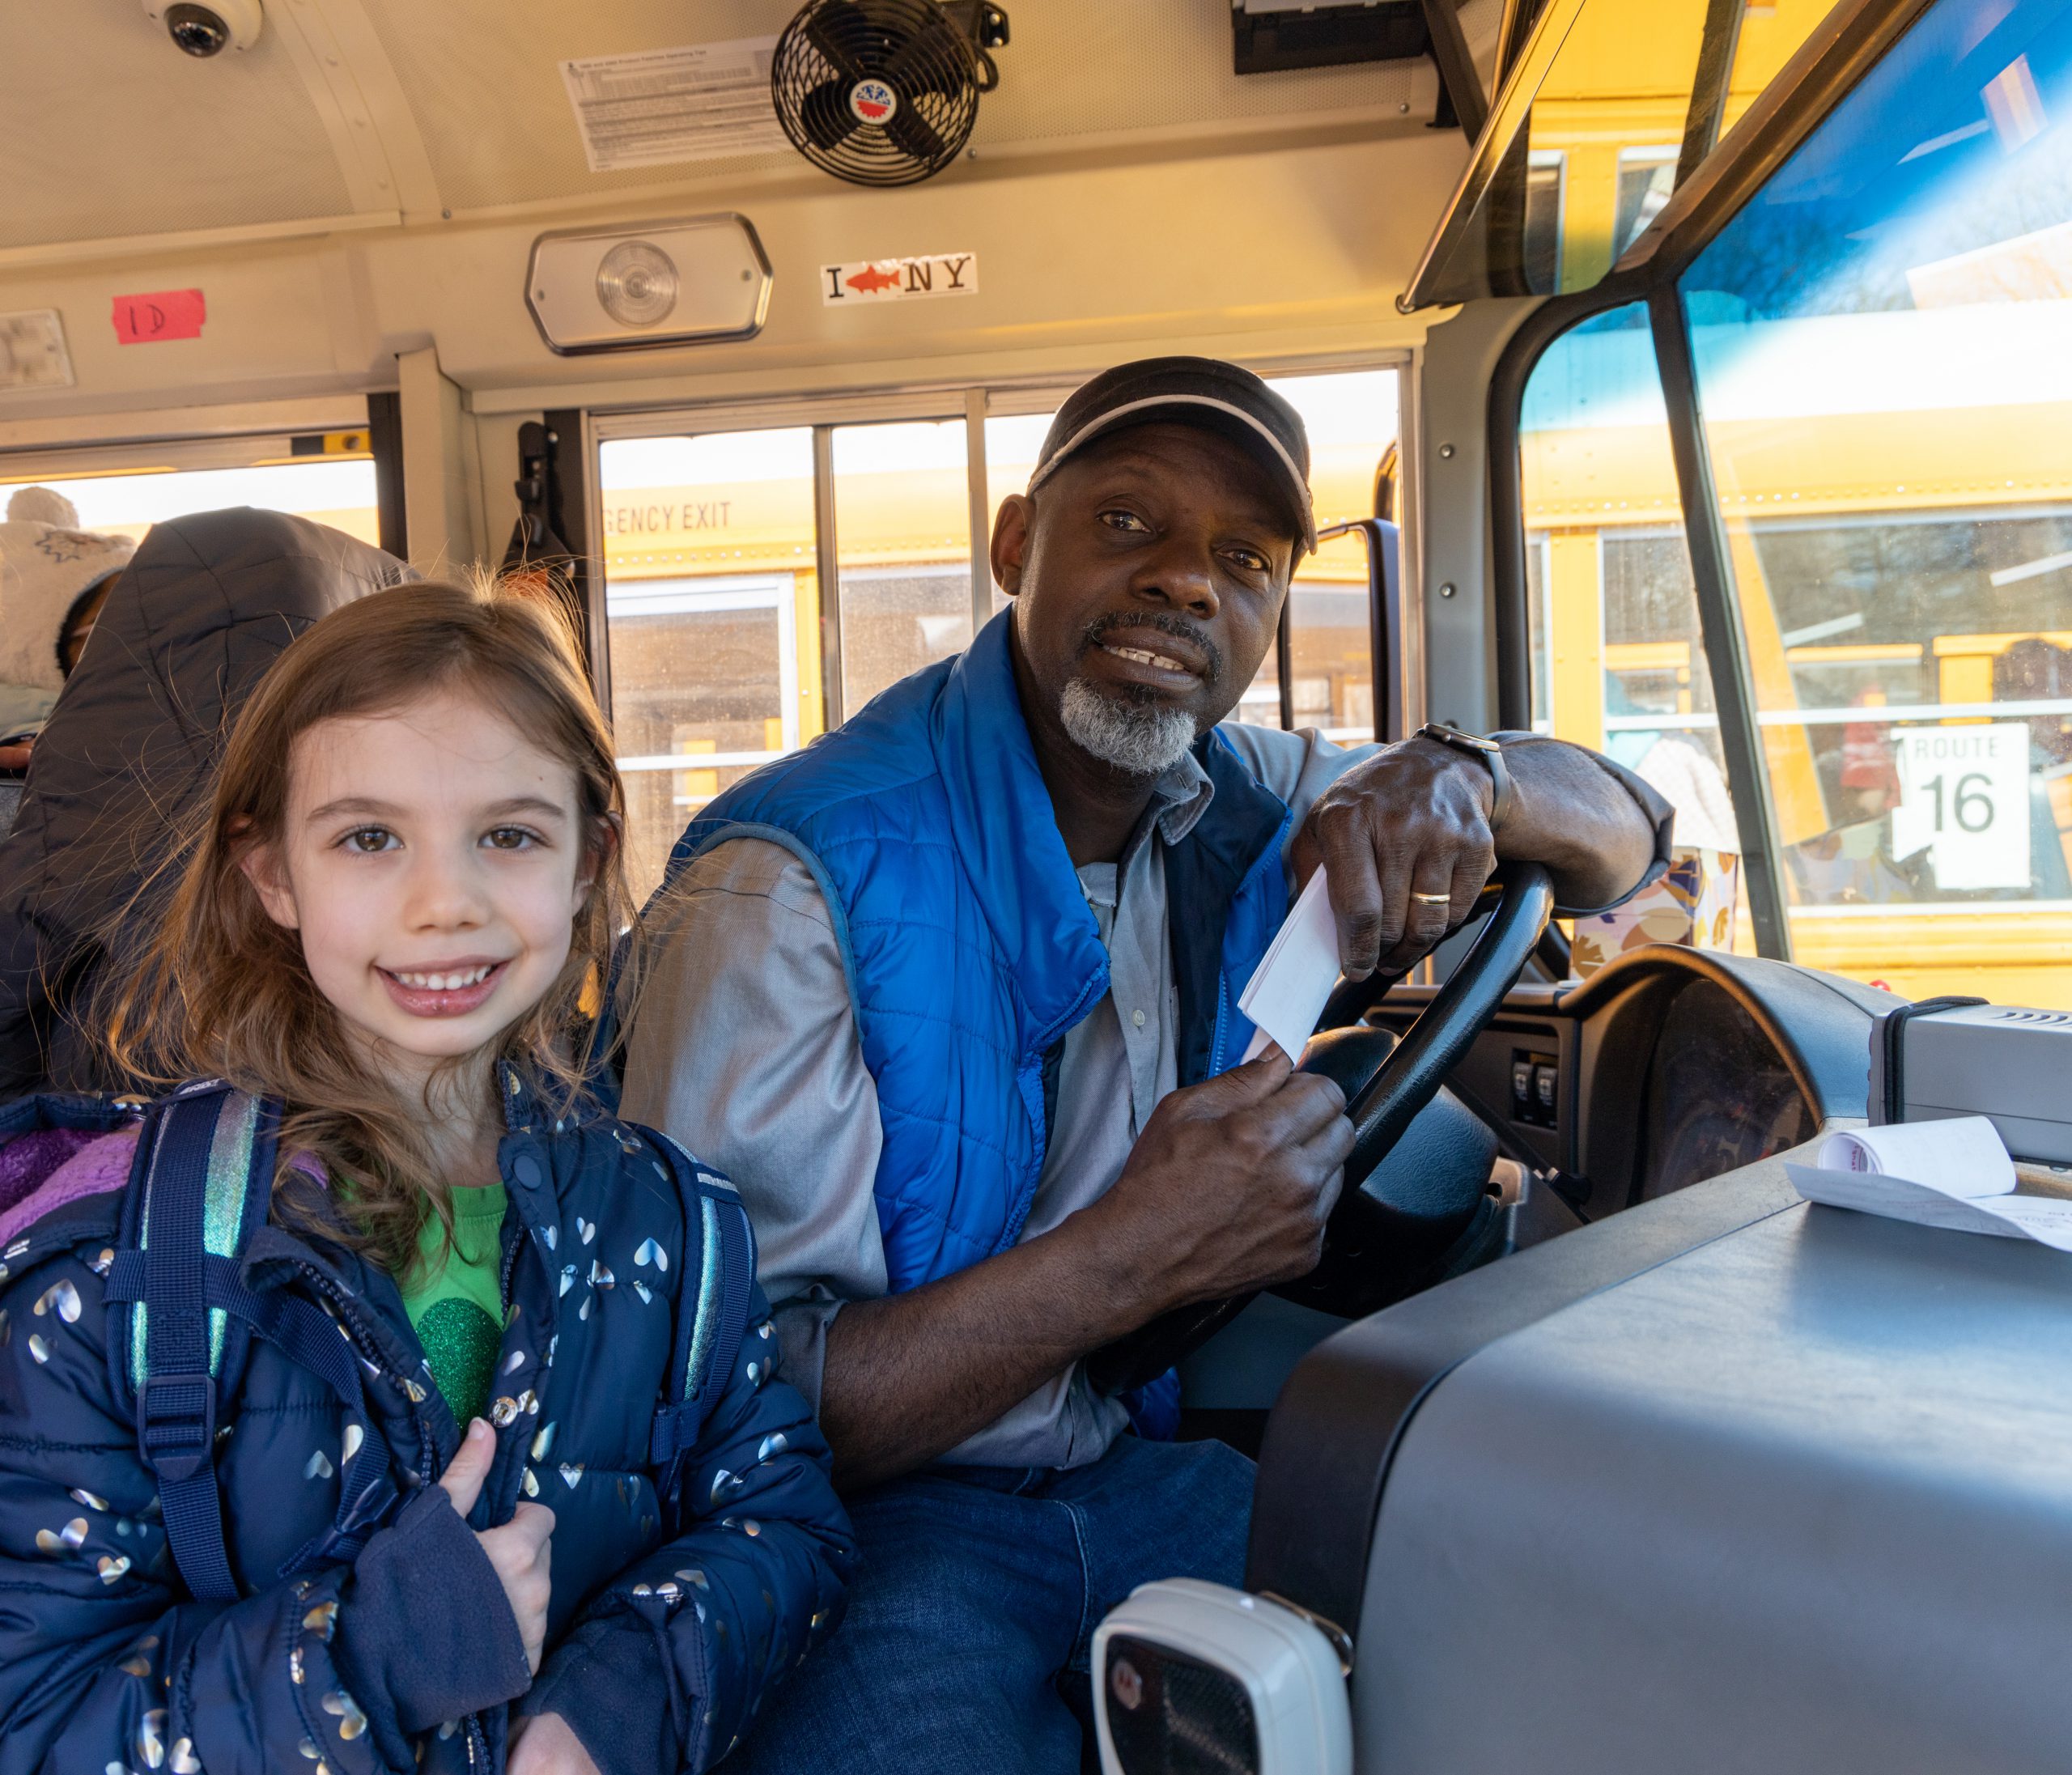 On a school bus, a bus driver and a student standing next to the driver both look at the camera